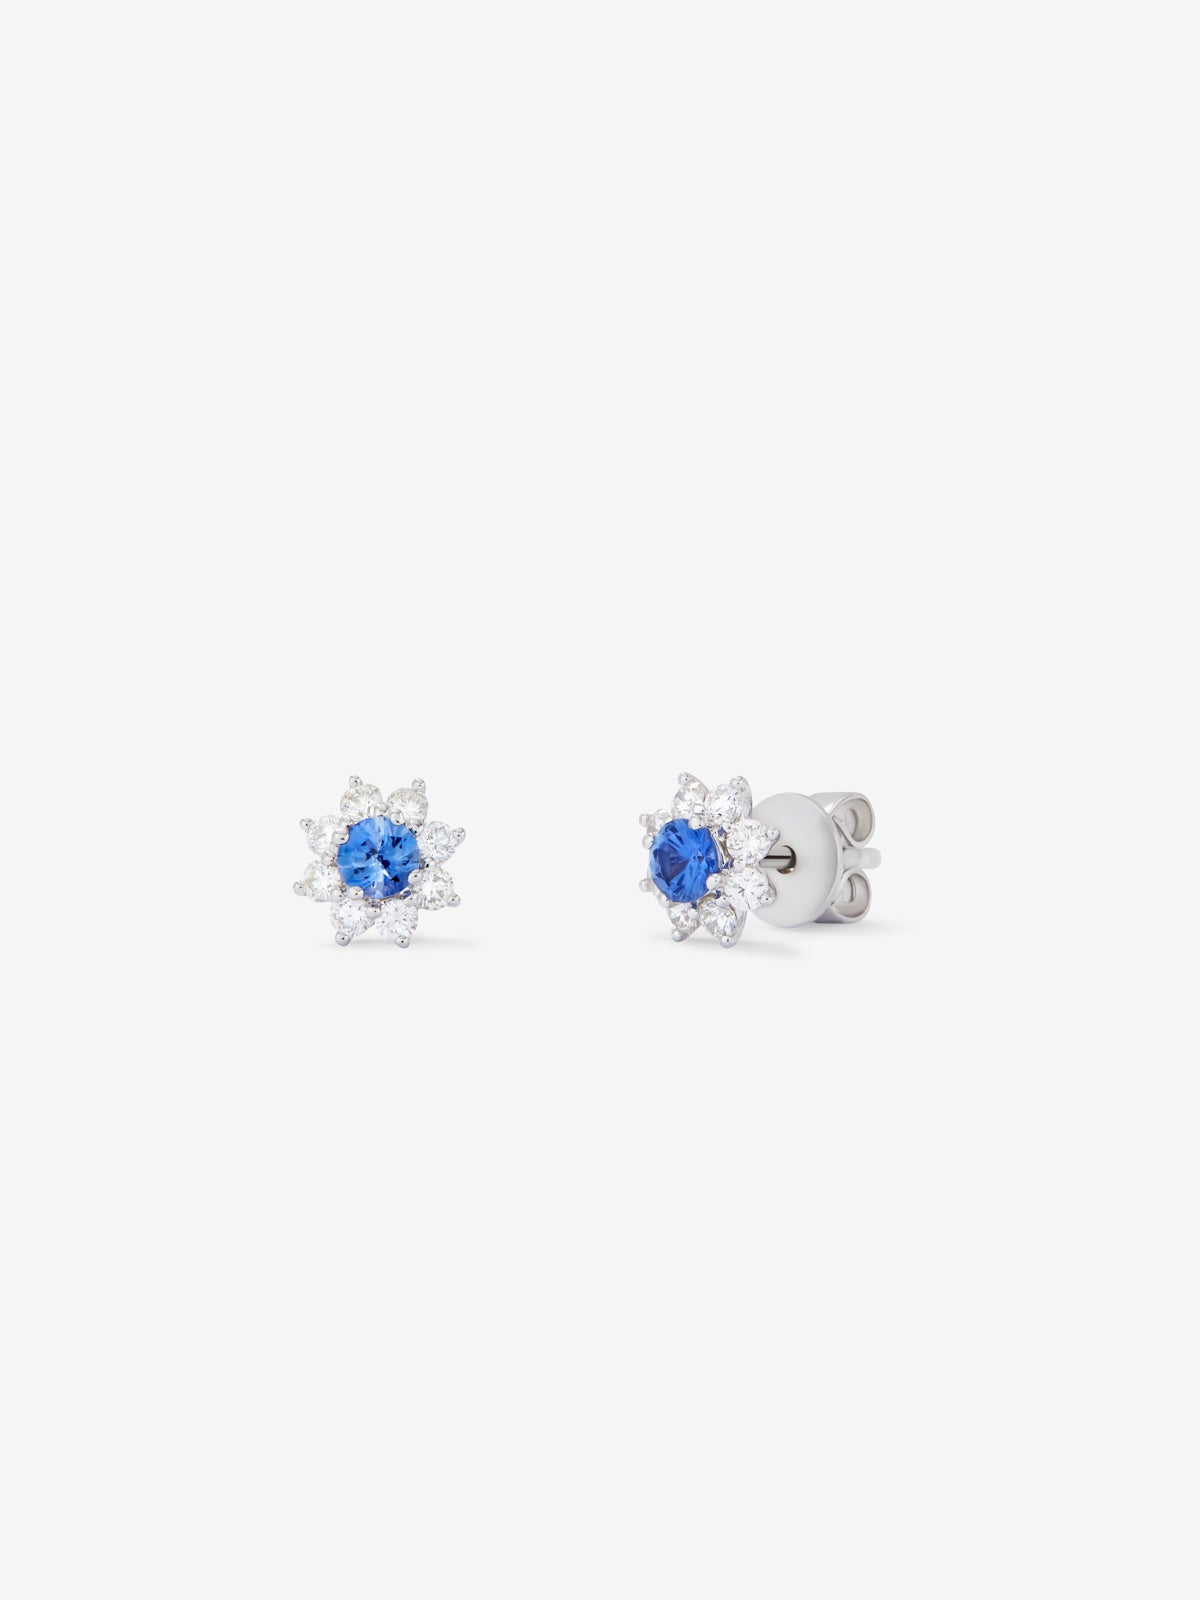 18K white gold earrings with 2 blue sapphires with a total of 0.43 cts and 16 brilliant-cut diamonds with a total of 0.44 cts in a star shape